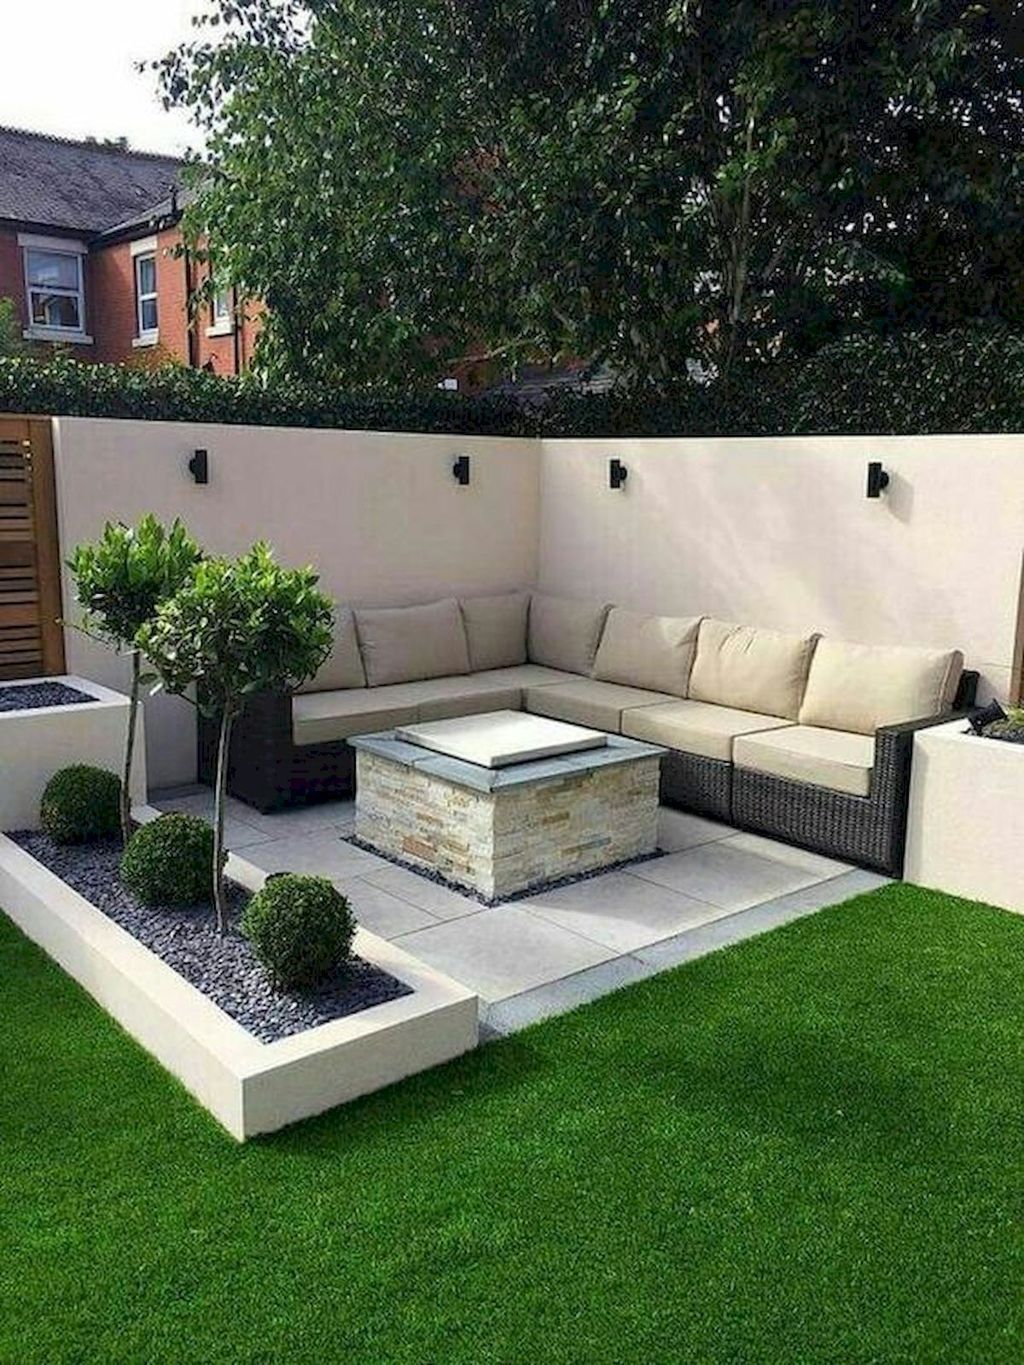 Innovative and Space-Saving Backyard Ideas for Small Spaces